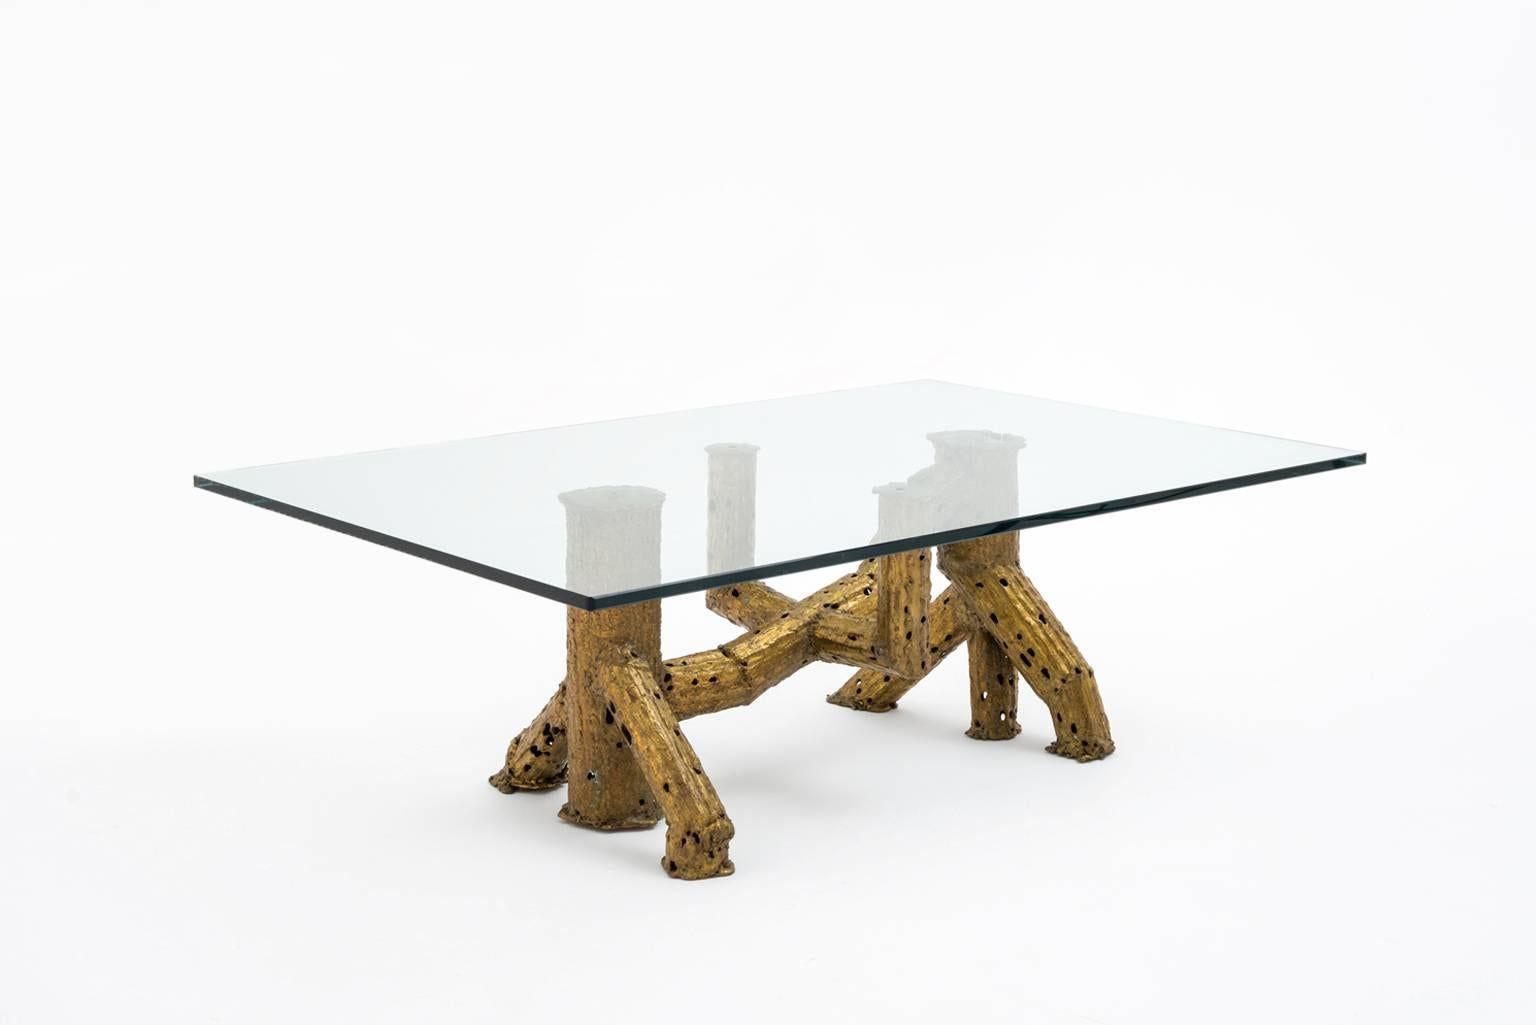 Sculptural gilded brass coffee table by Artist Paul Moerenhout, Belgium, circa 1970. Unique piece. The sculptural base is made of abstracted trunks of a cactus with beautiful details of artistic expression. In excellent condition.